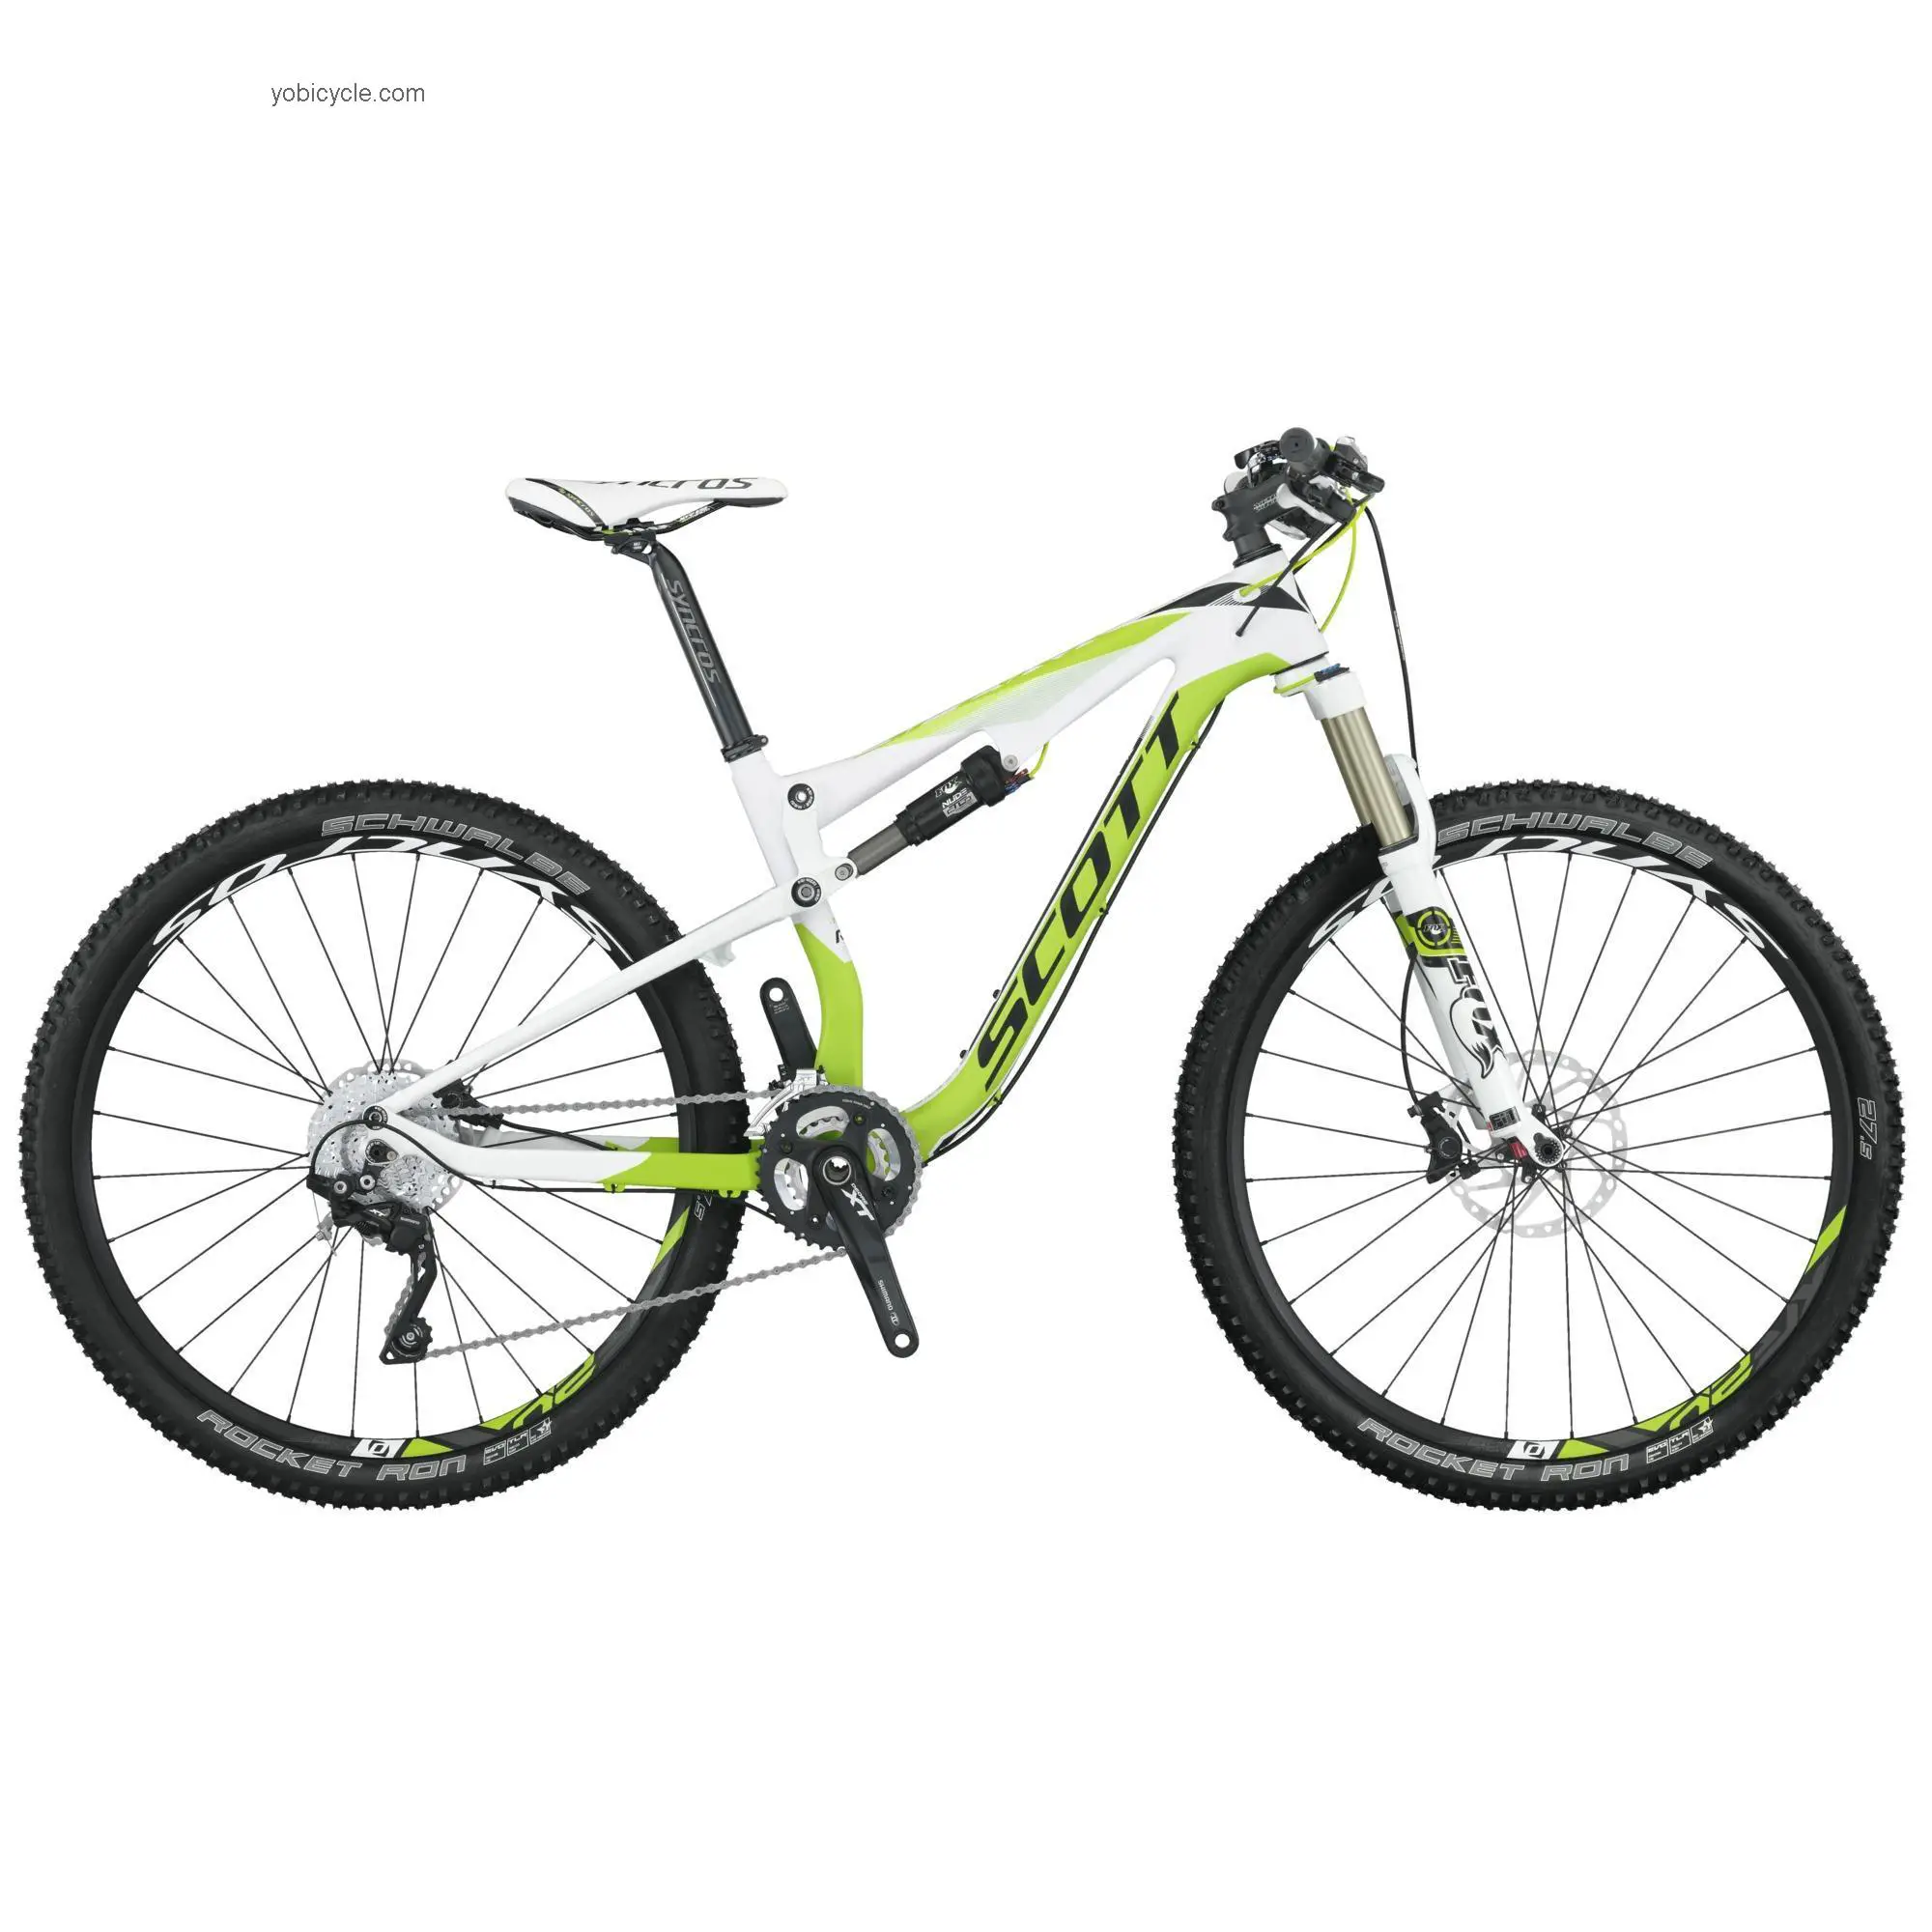 Scott Contessa Spark 700 RC competitors and comparison tool online specs and performance